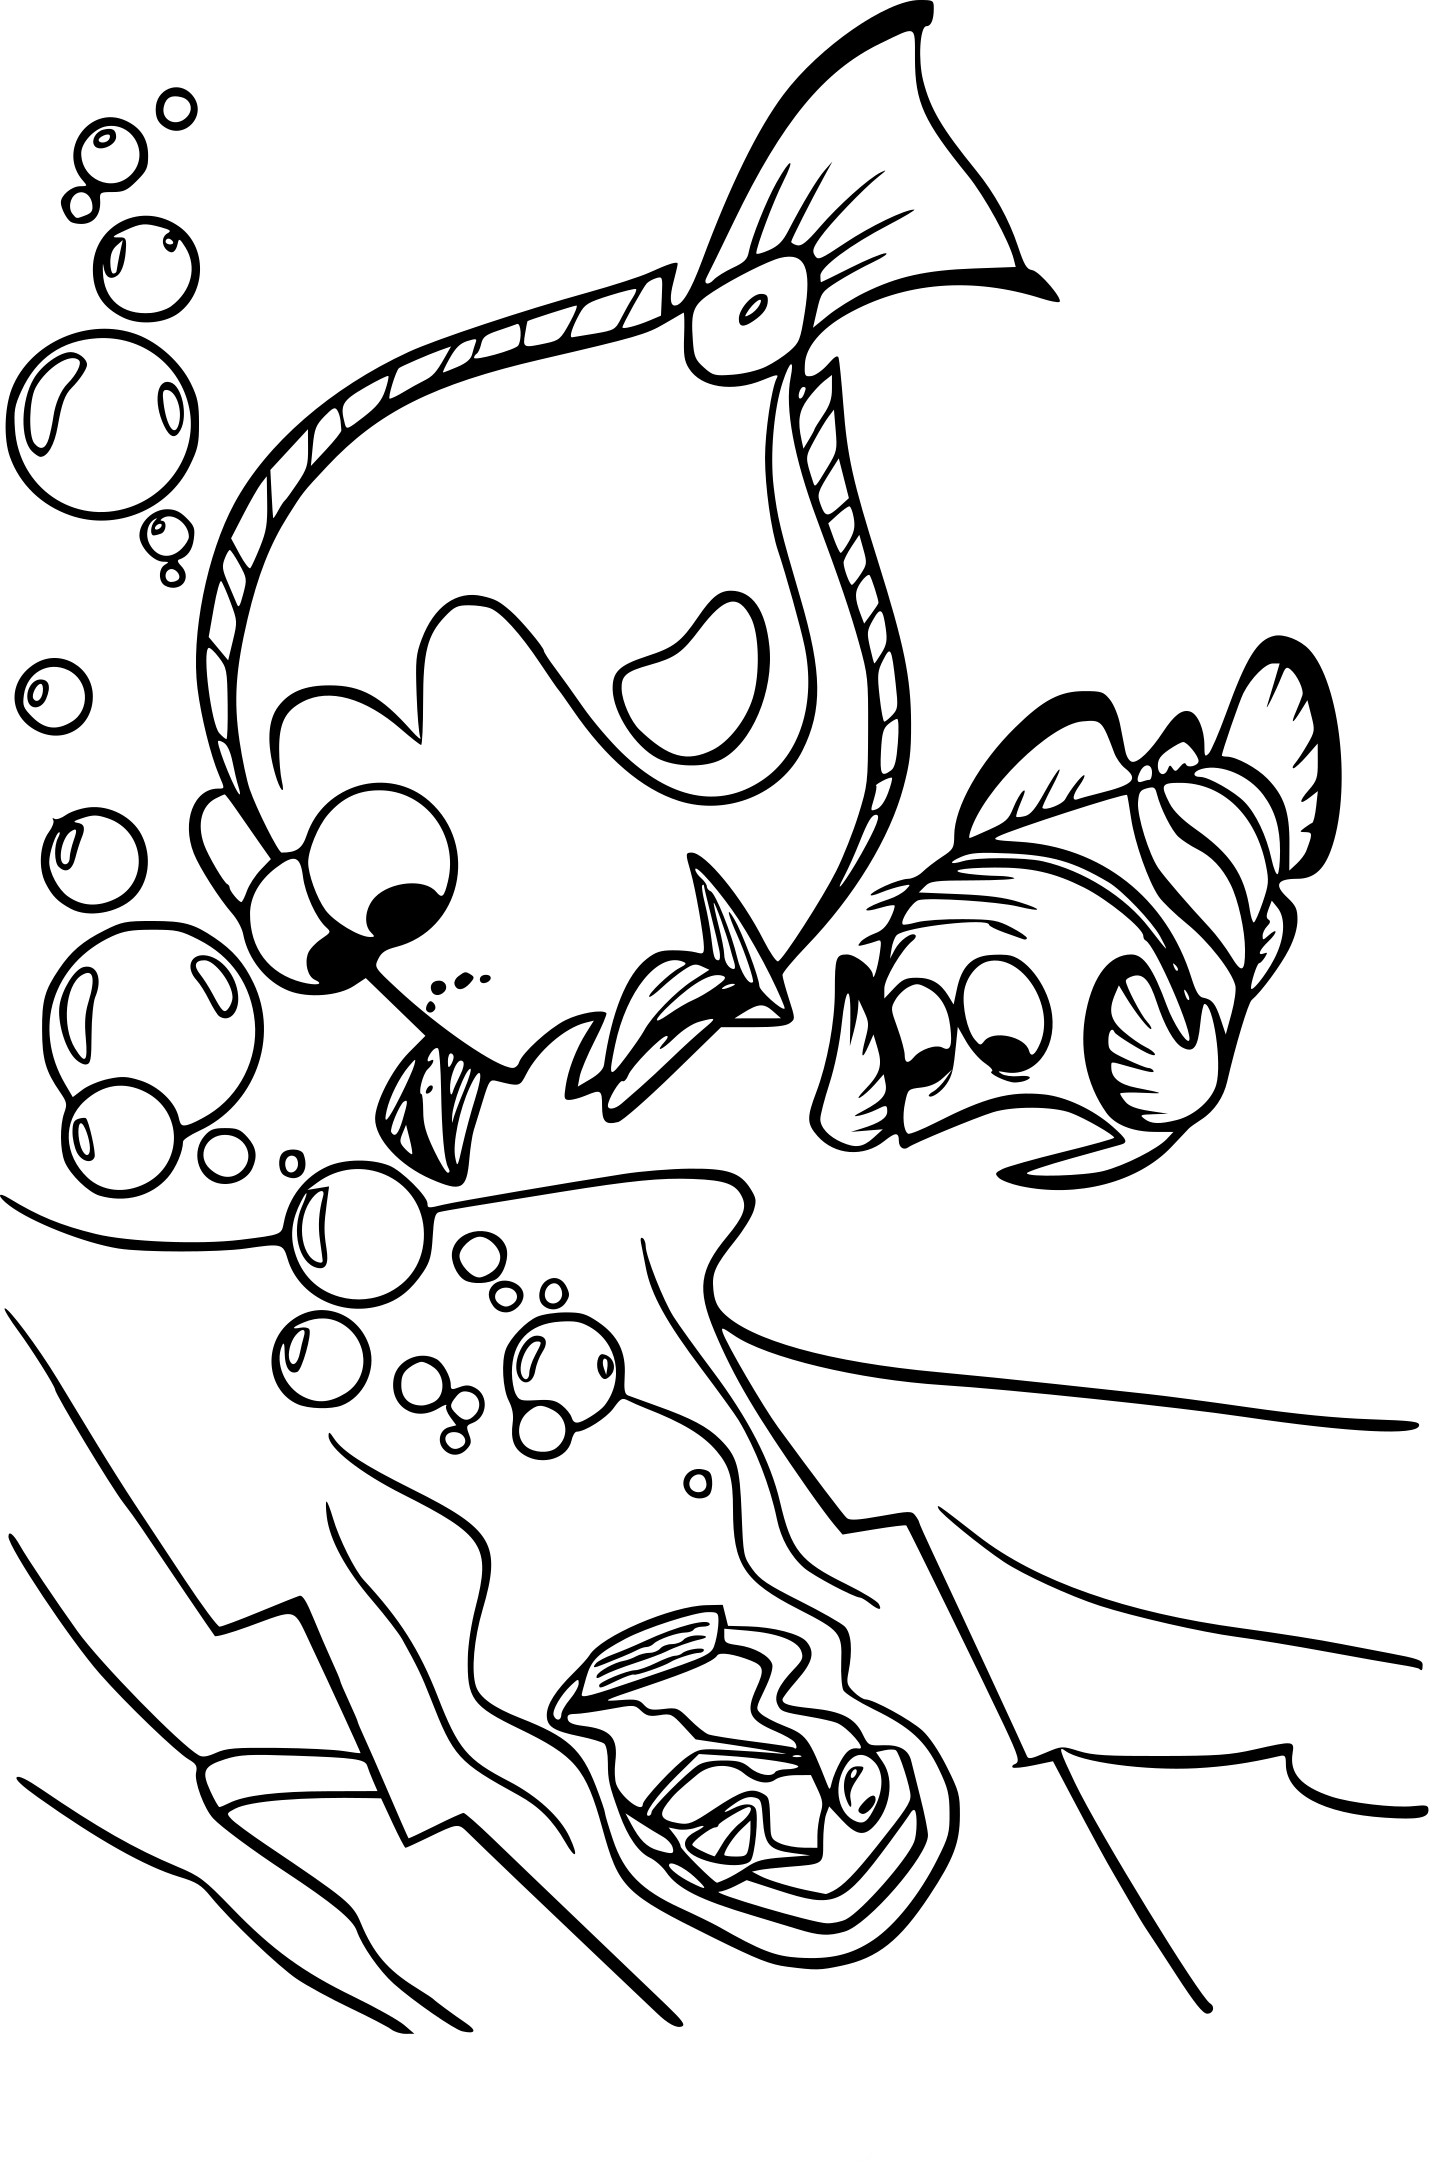 The World Of Nemo coloring page